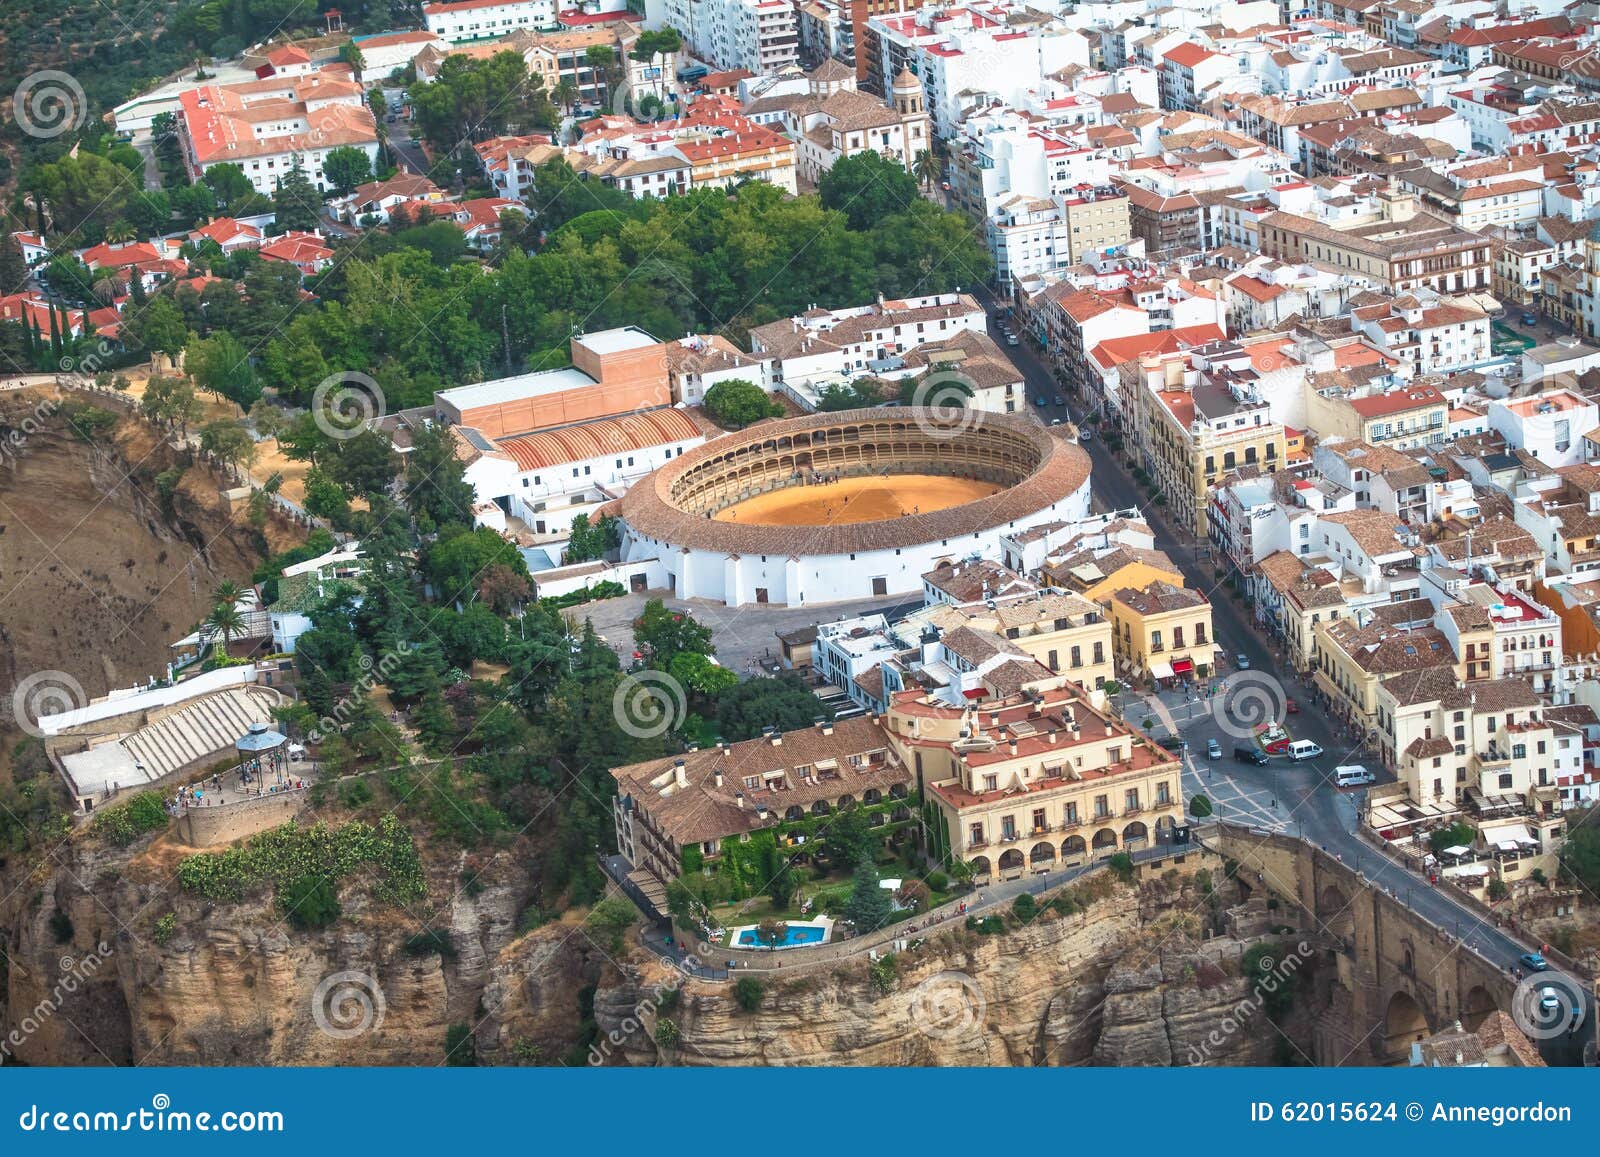 scenic view of bridge puente nuevo, canyon, lookout and bullring, ronda, malaga, andalusia, spain. aerial views